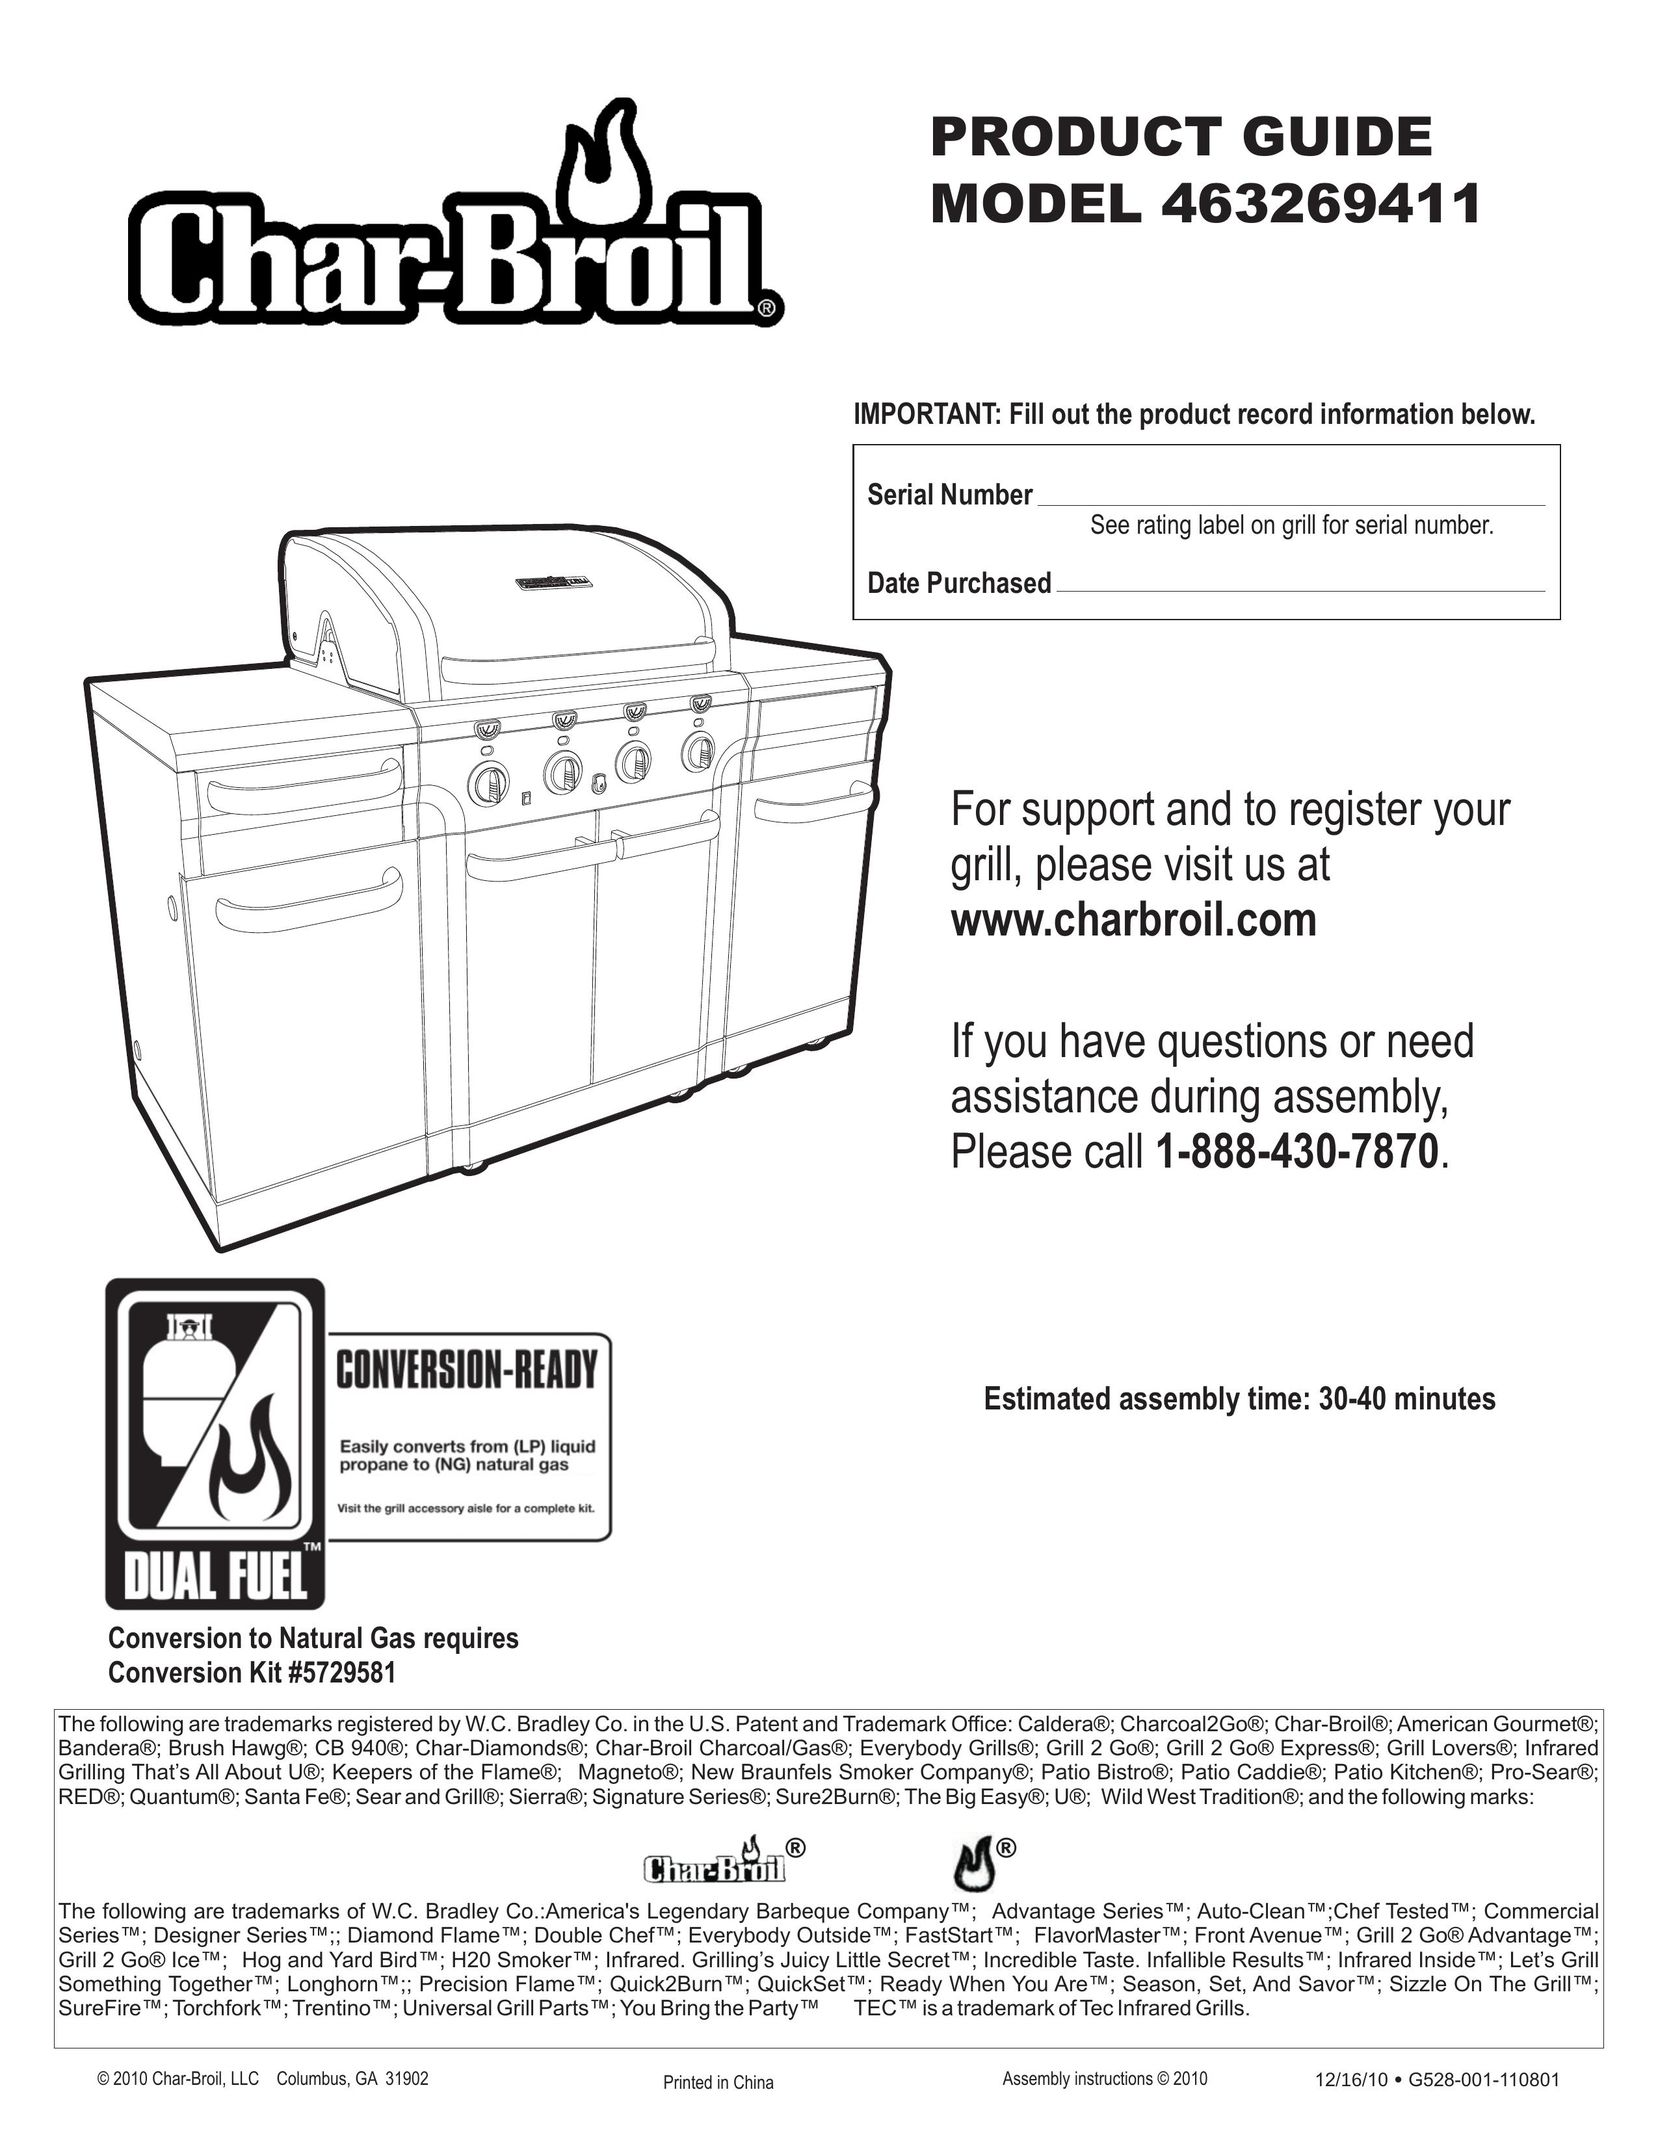 Char-Broil 463269411 Convection Oven User Manual